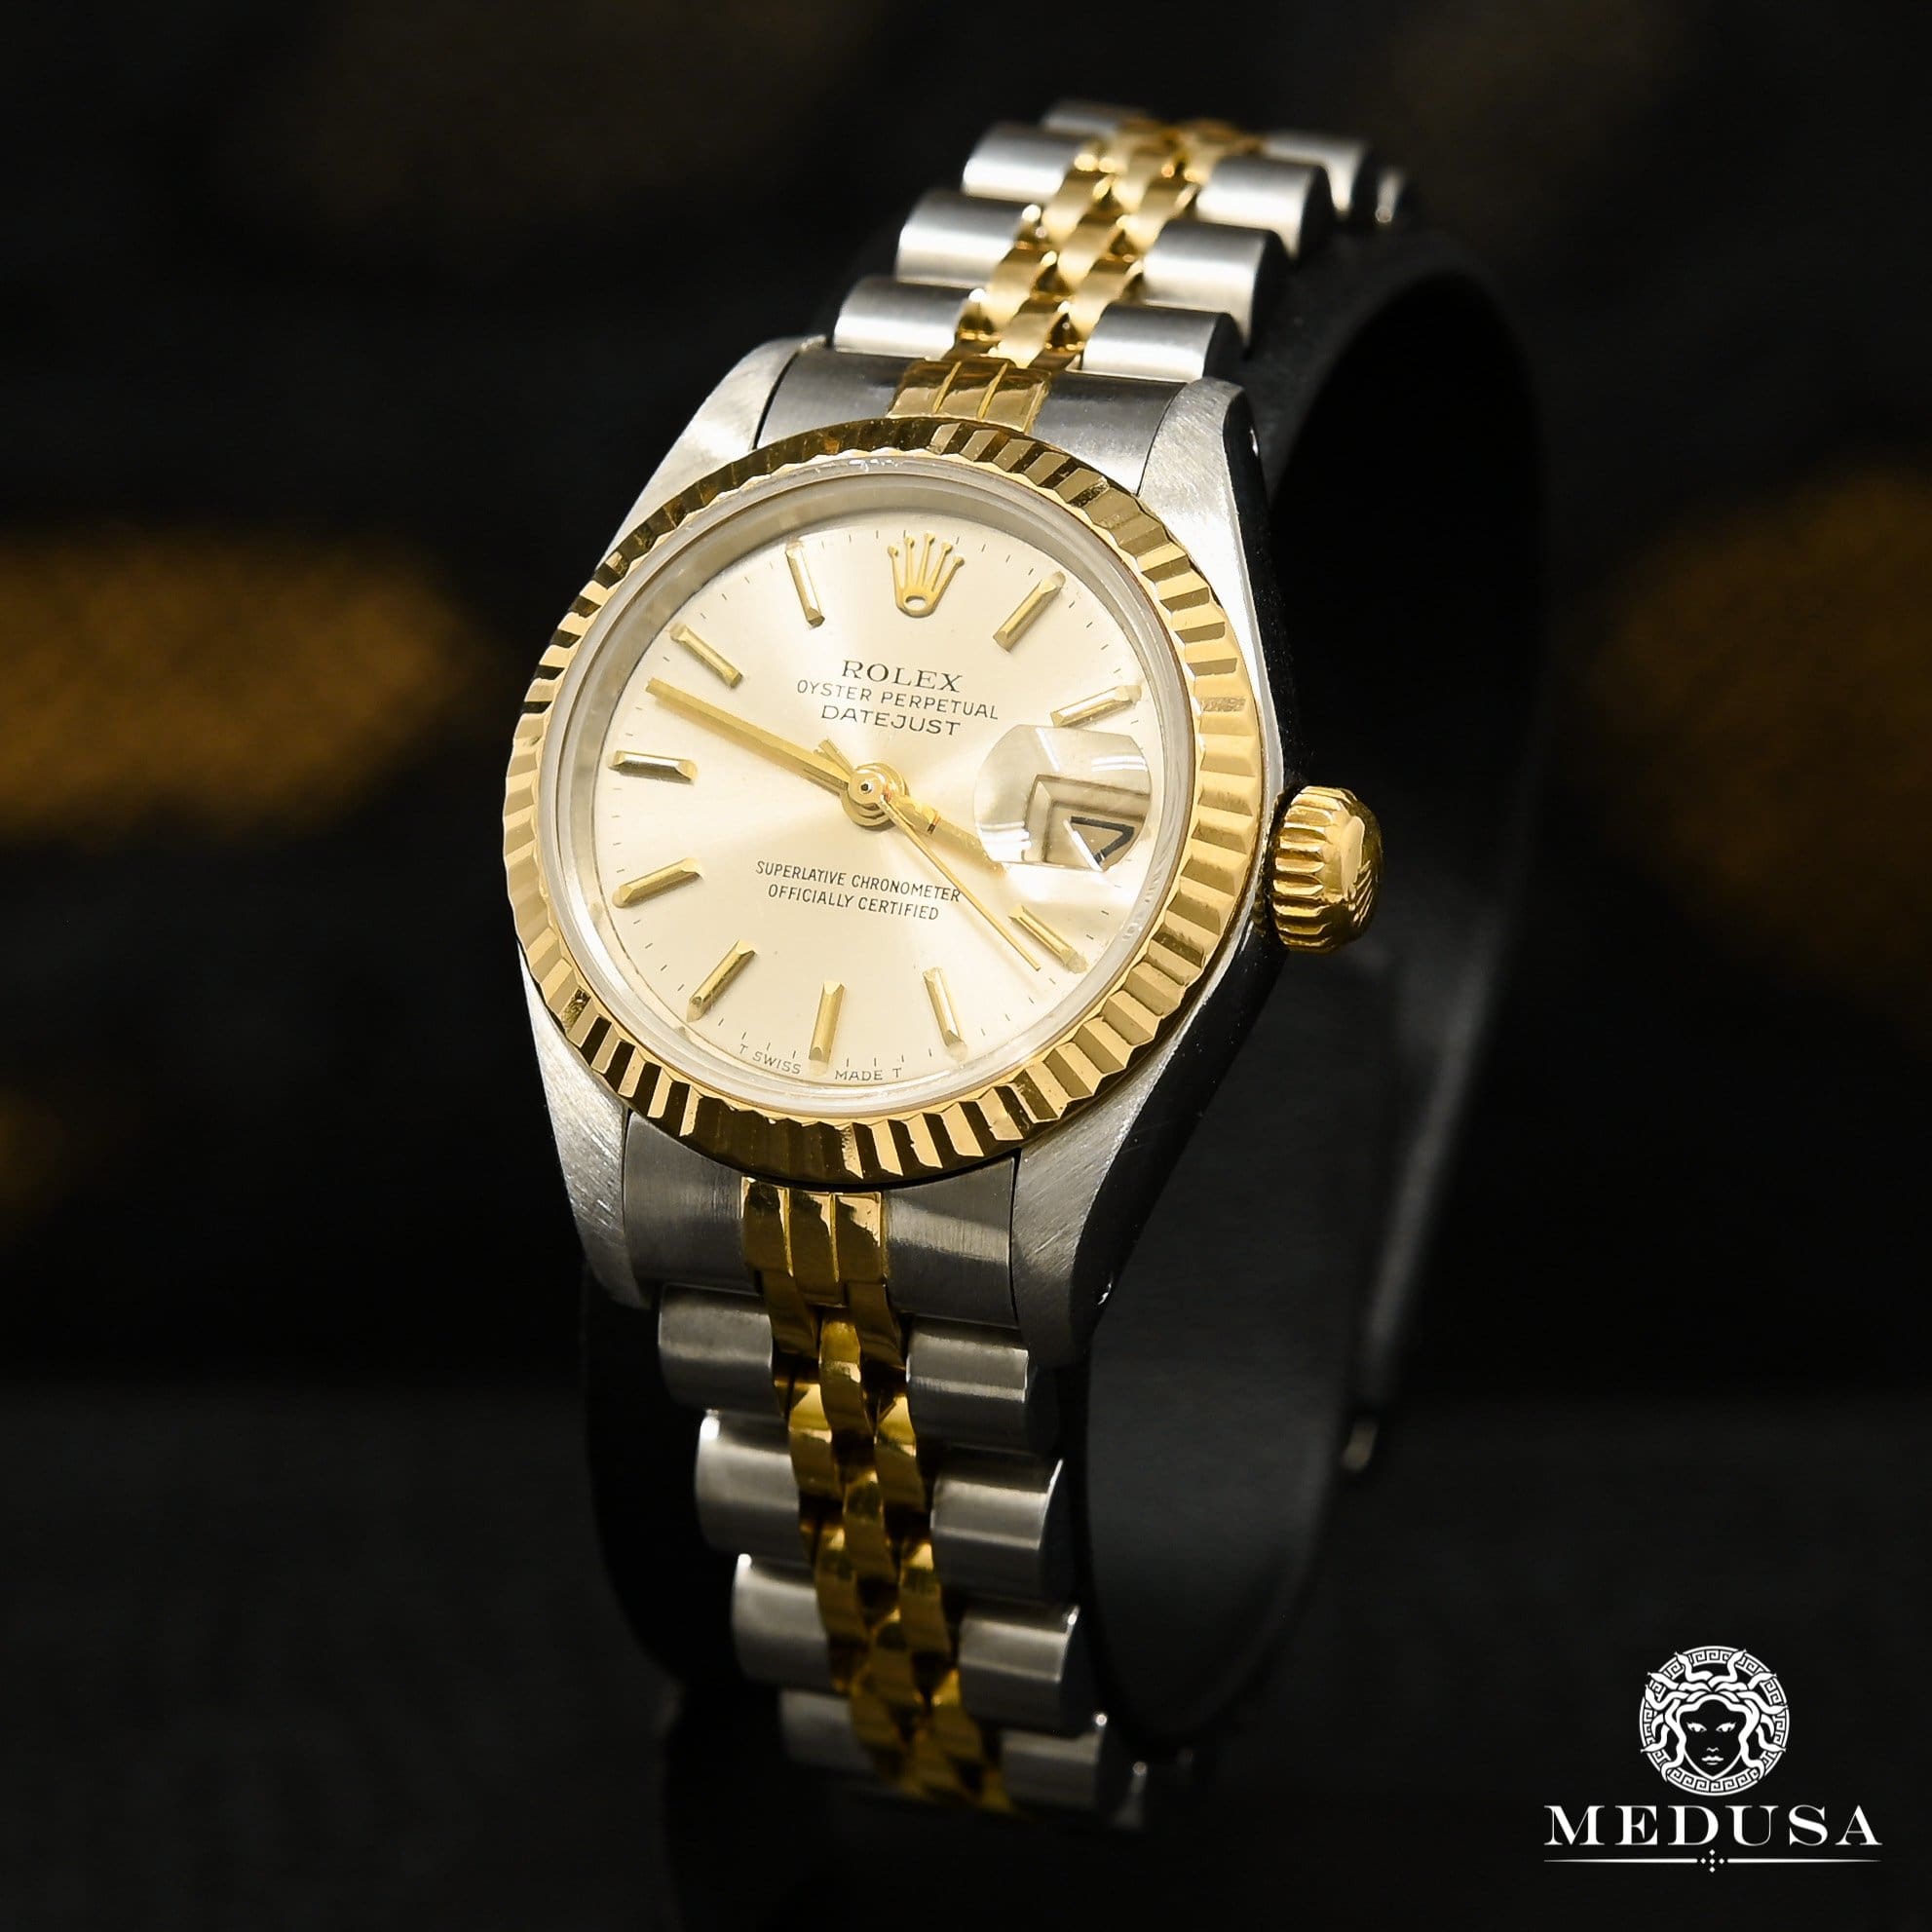 rolex women's watch silver and gold